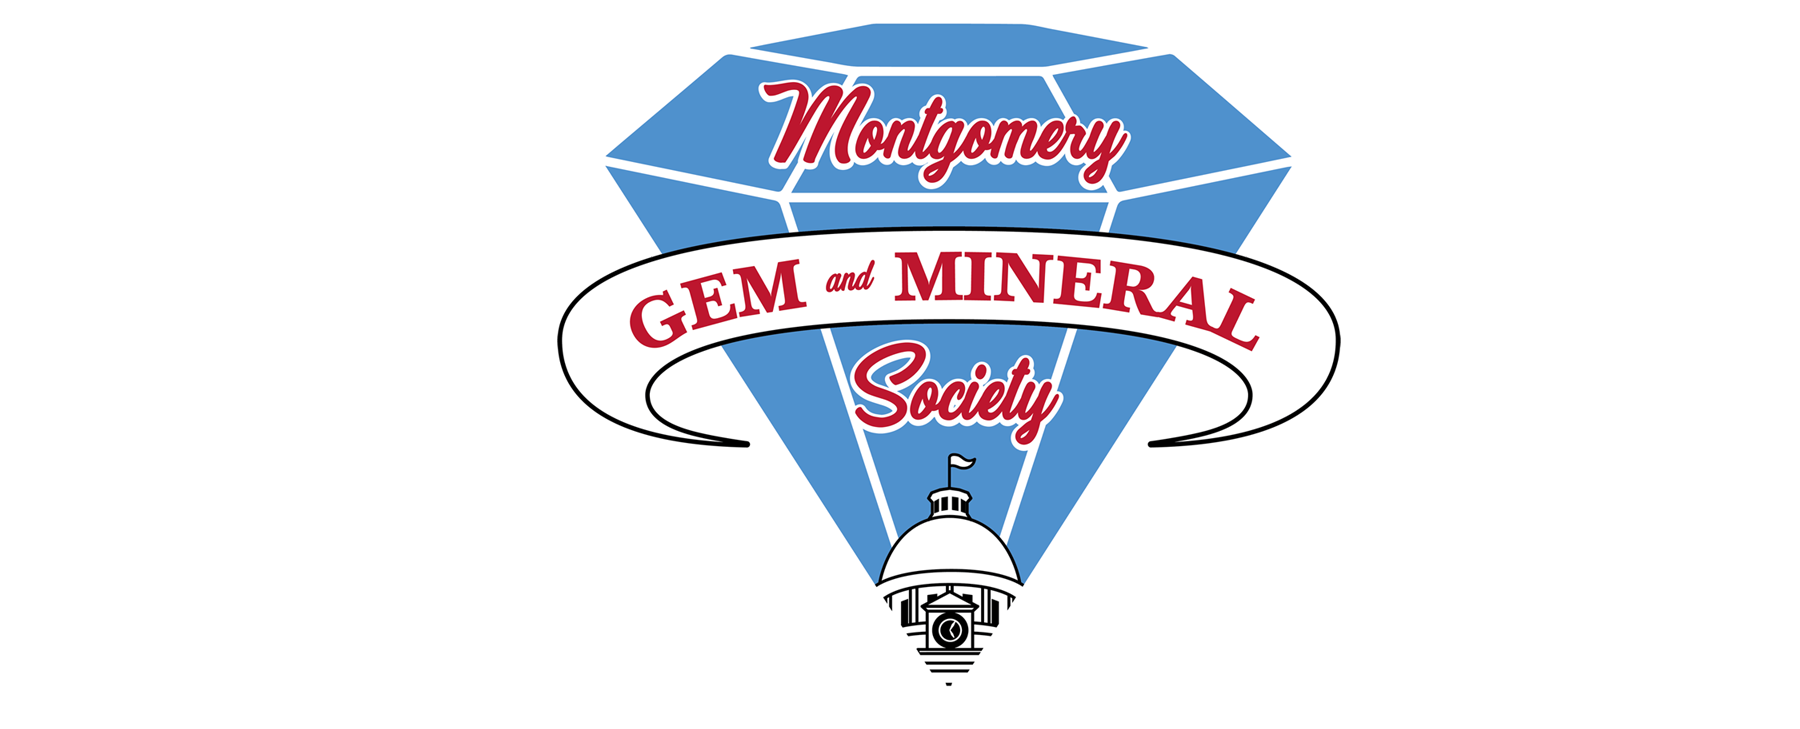 Montgomery Gem and Mineral Society